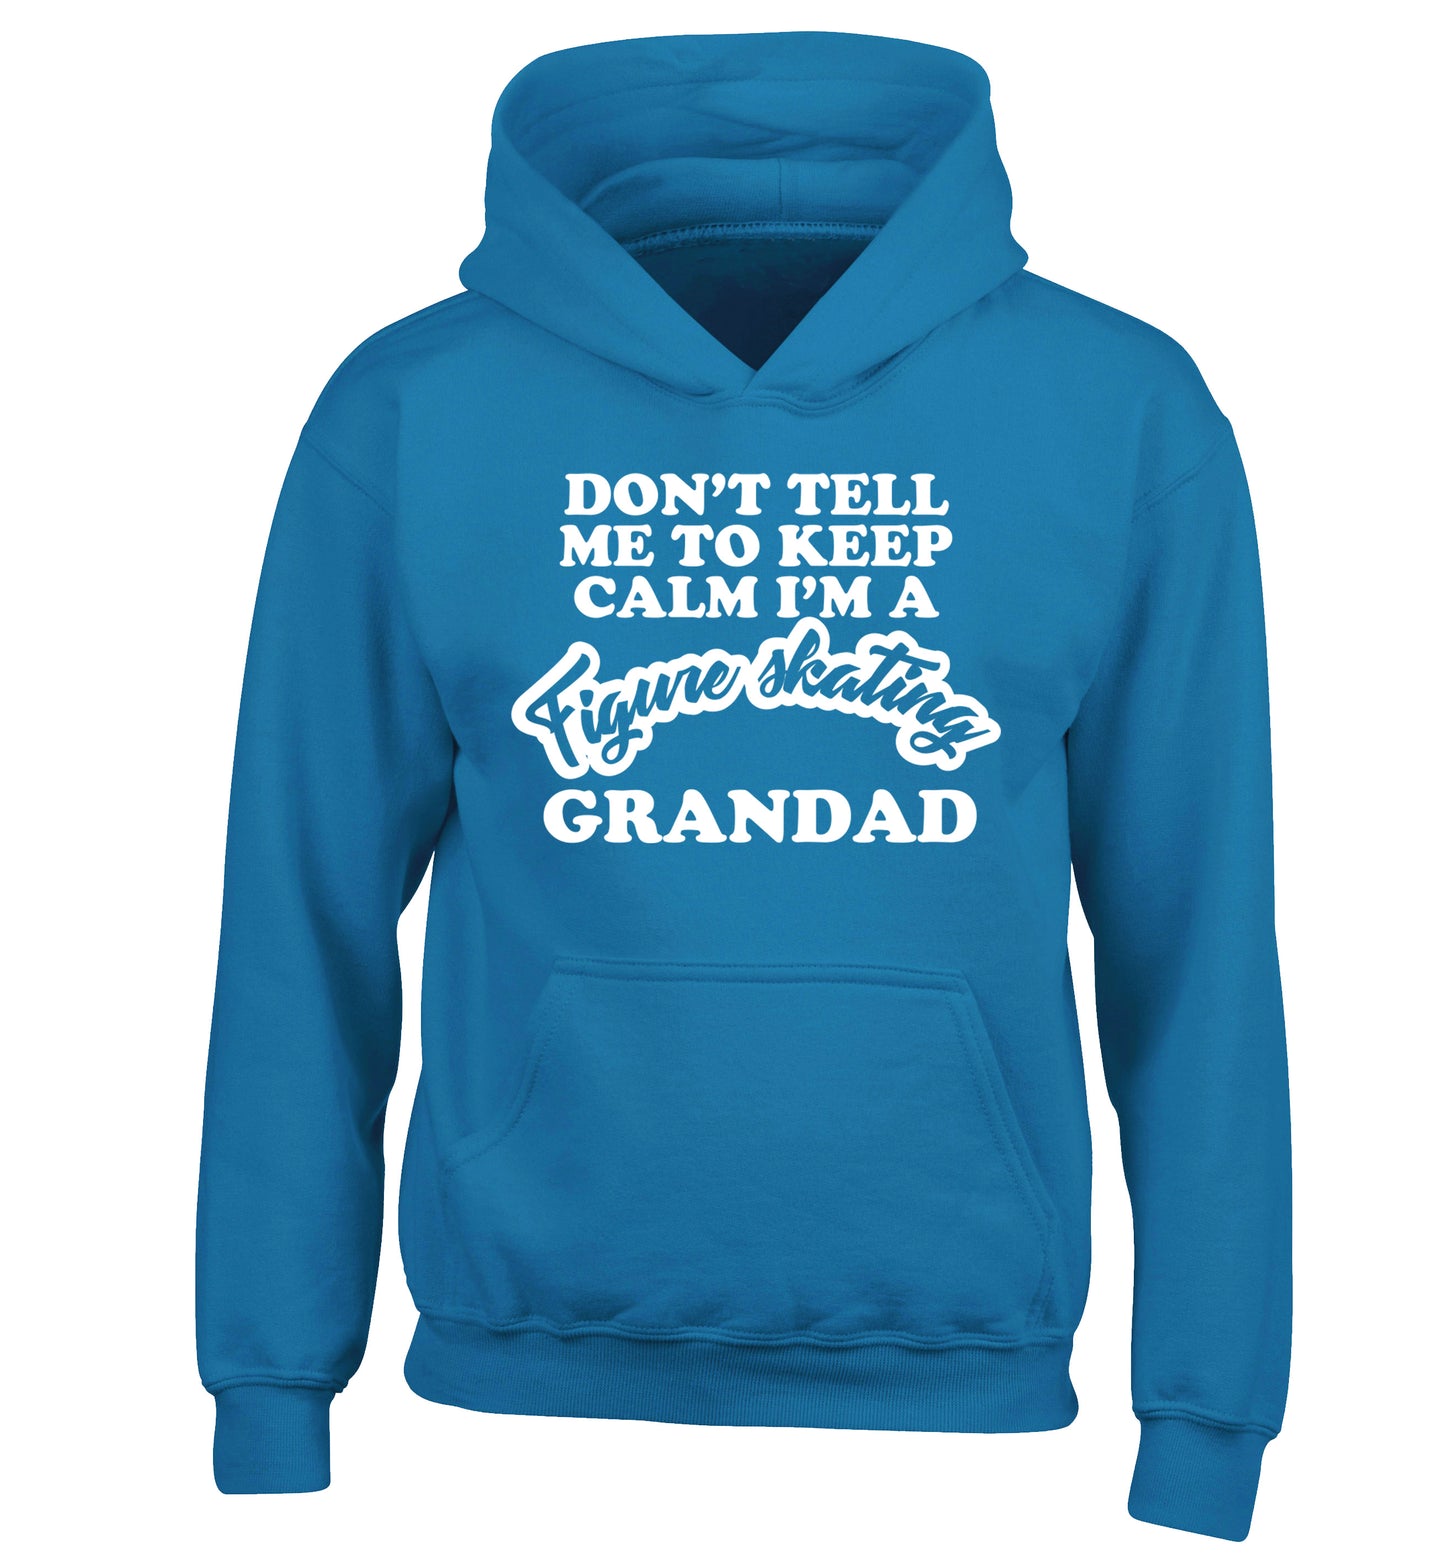 Don't tell me to keep calm I'm a figure skating grandad children's blue hoodie 12-14 Years